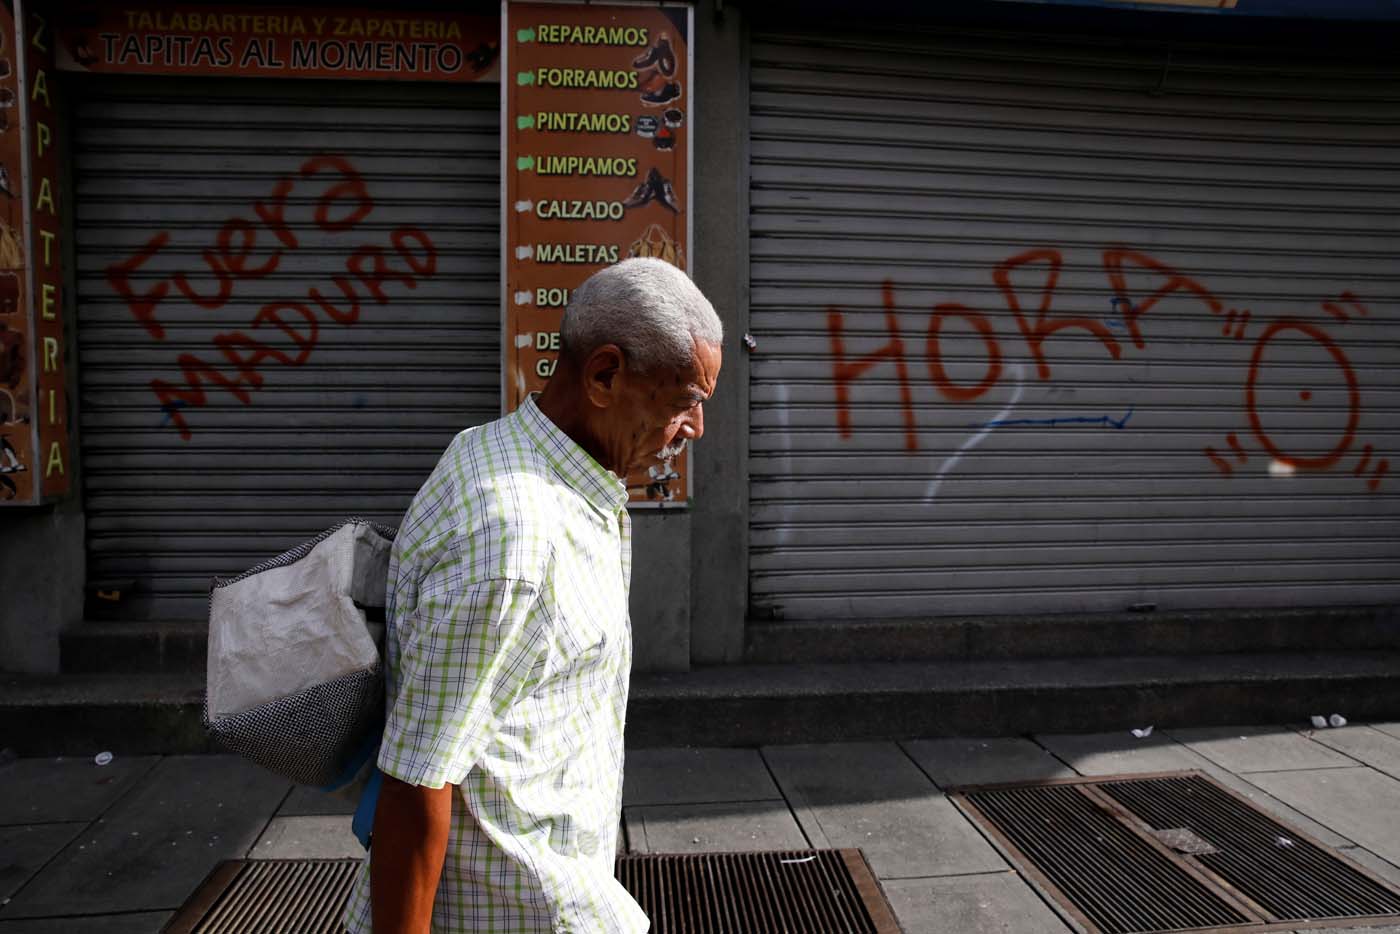 A man walks on the street in front of a graffiti that reads "Maduro leave" during a strike called to protest against Venezuelan President Nicolas Maduro's government in Caracas, Venezuela, July 20, 2017. REUTERS/Carlos Garcia Rawlins